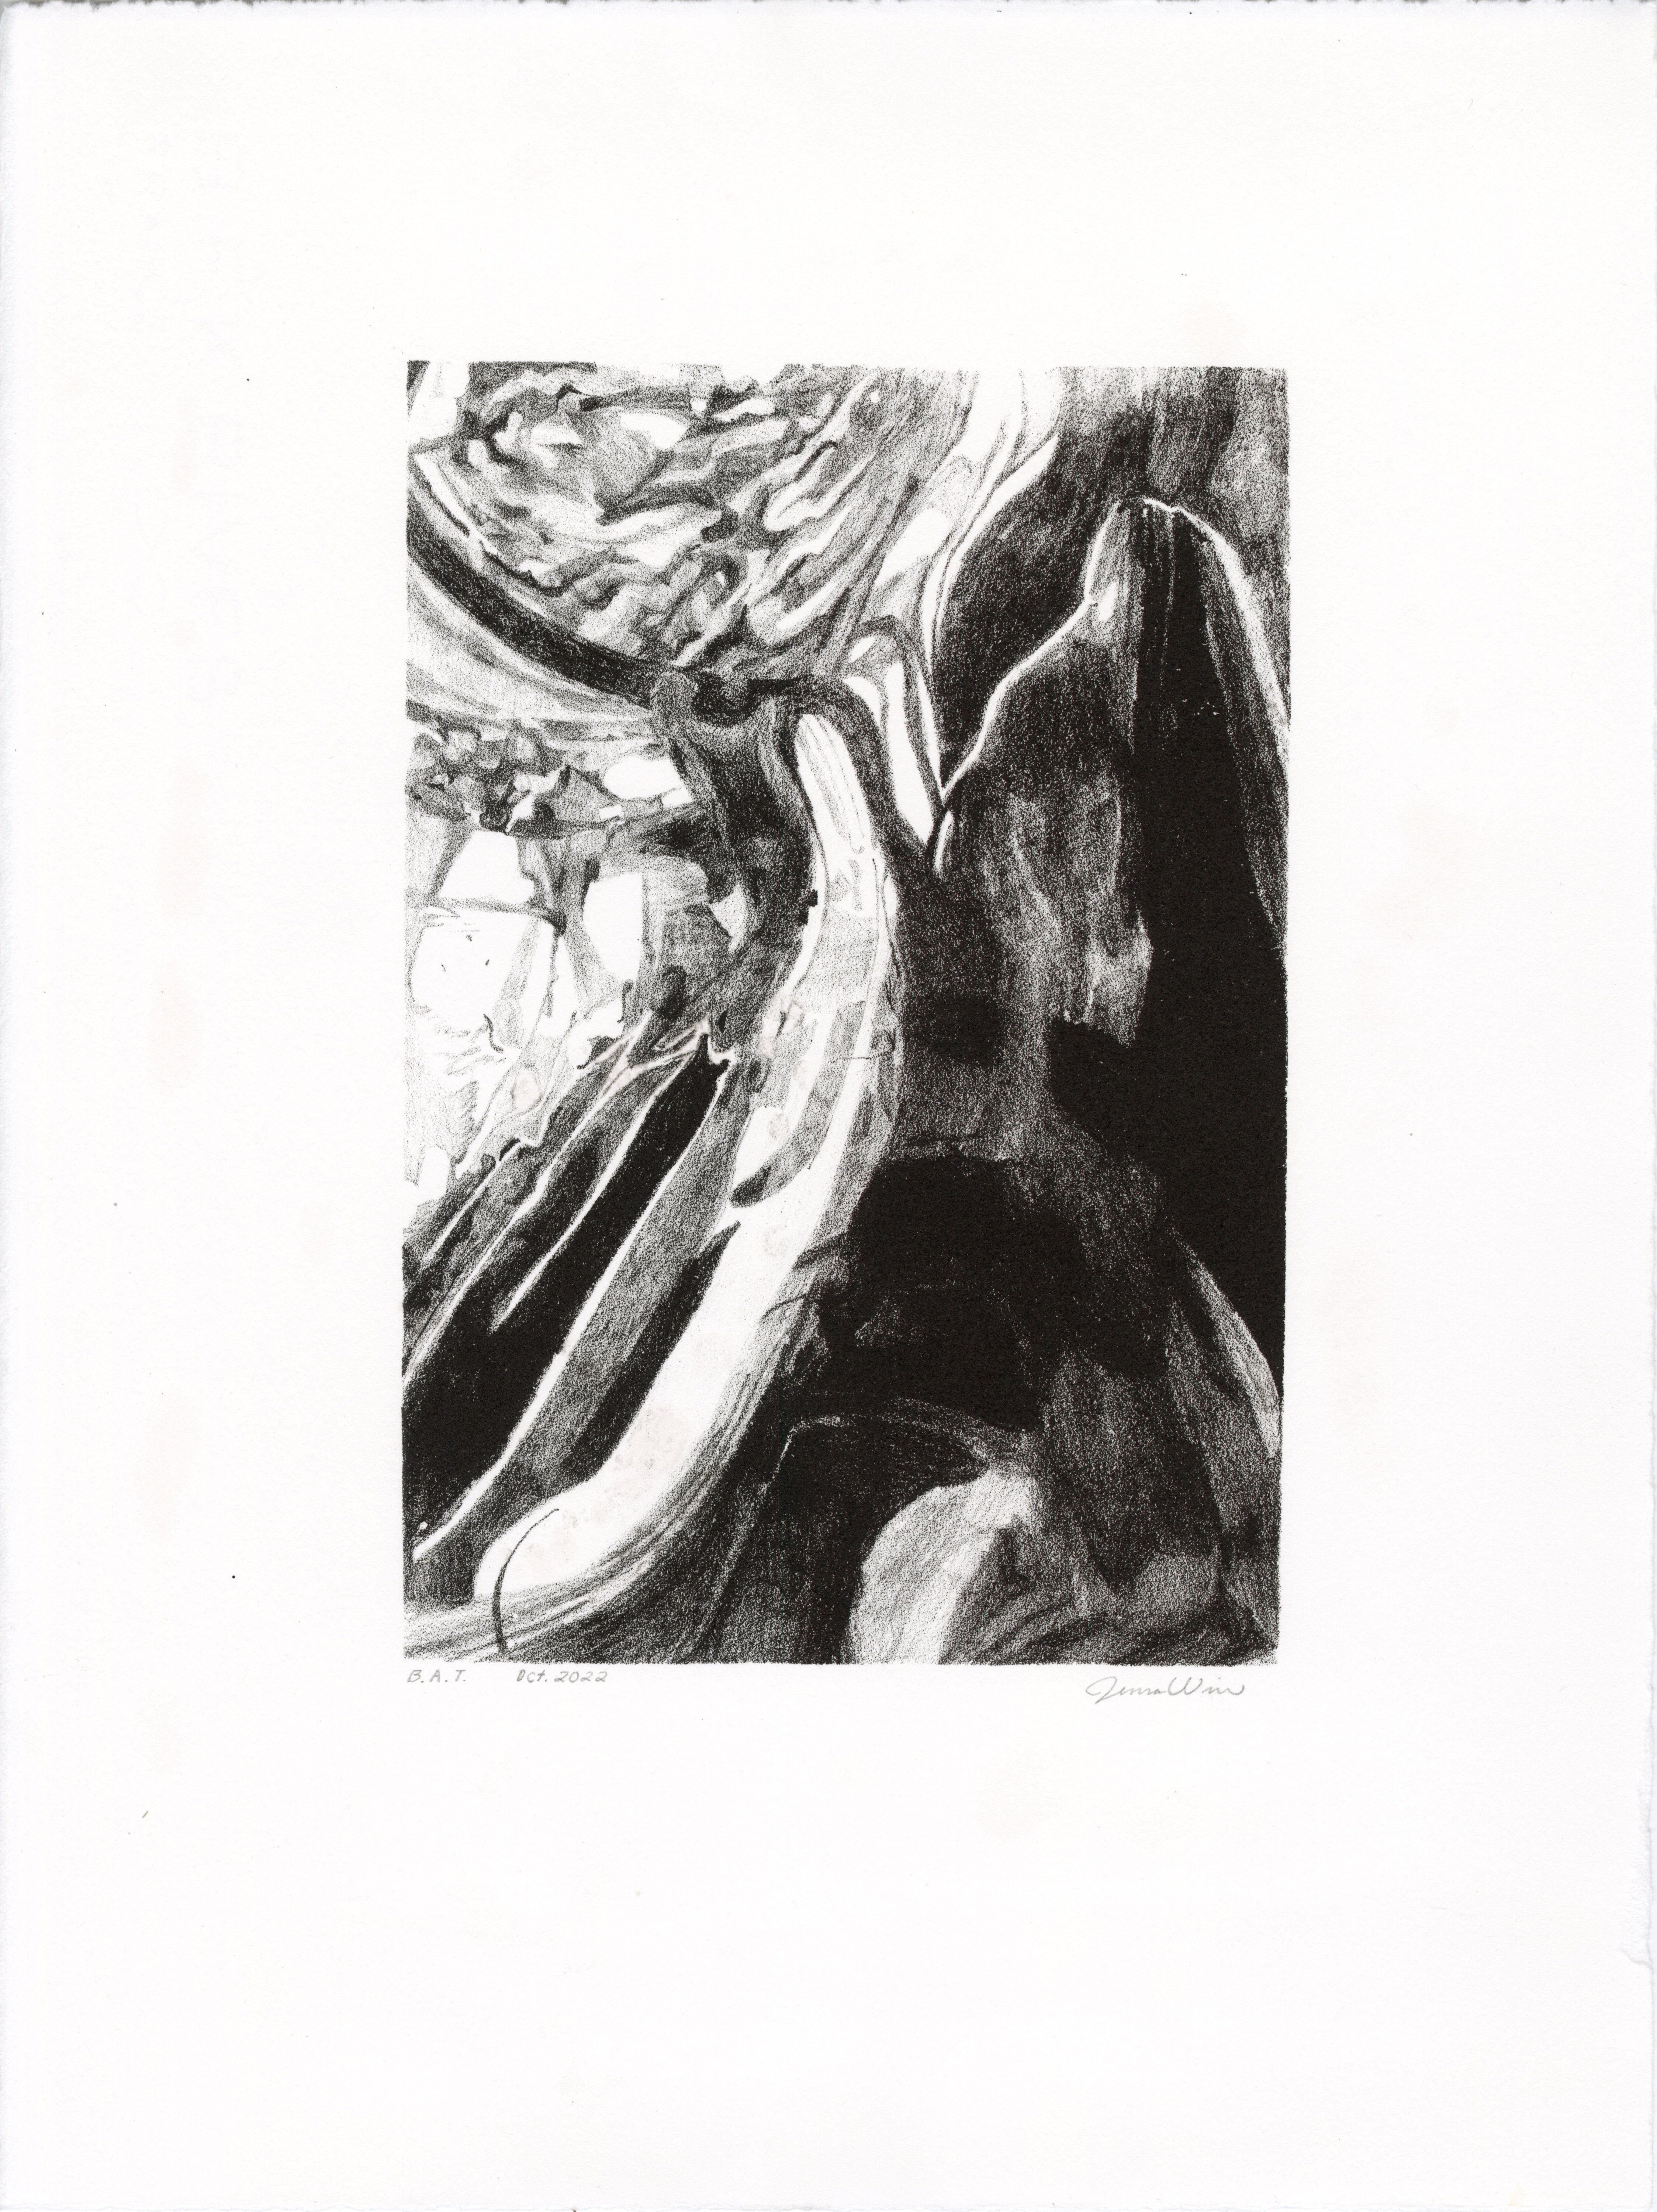 Abstract Lithographic Print